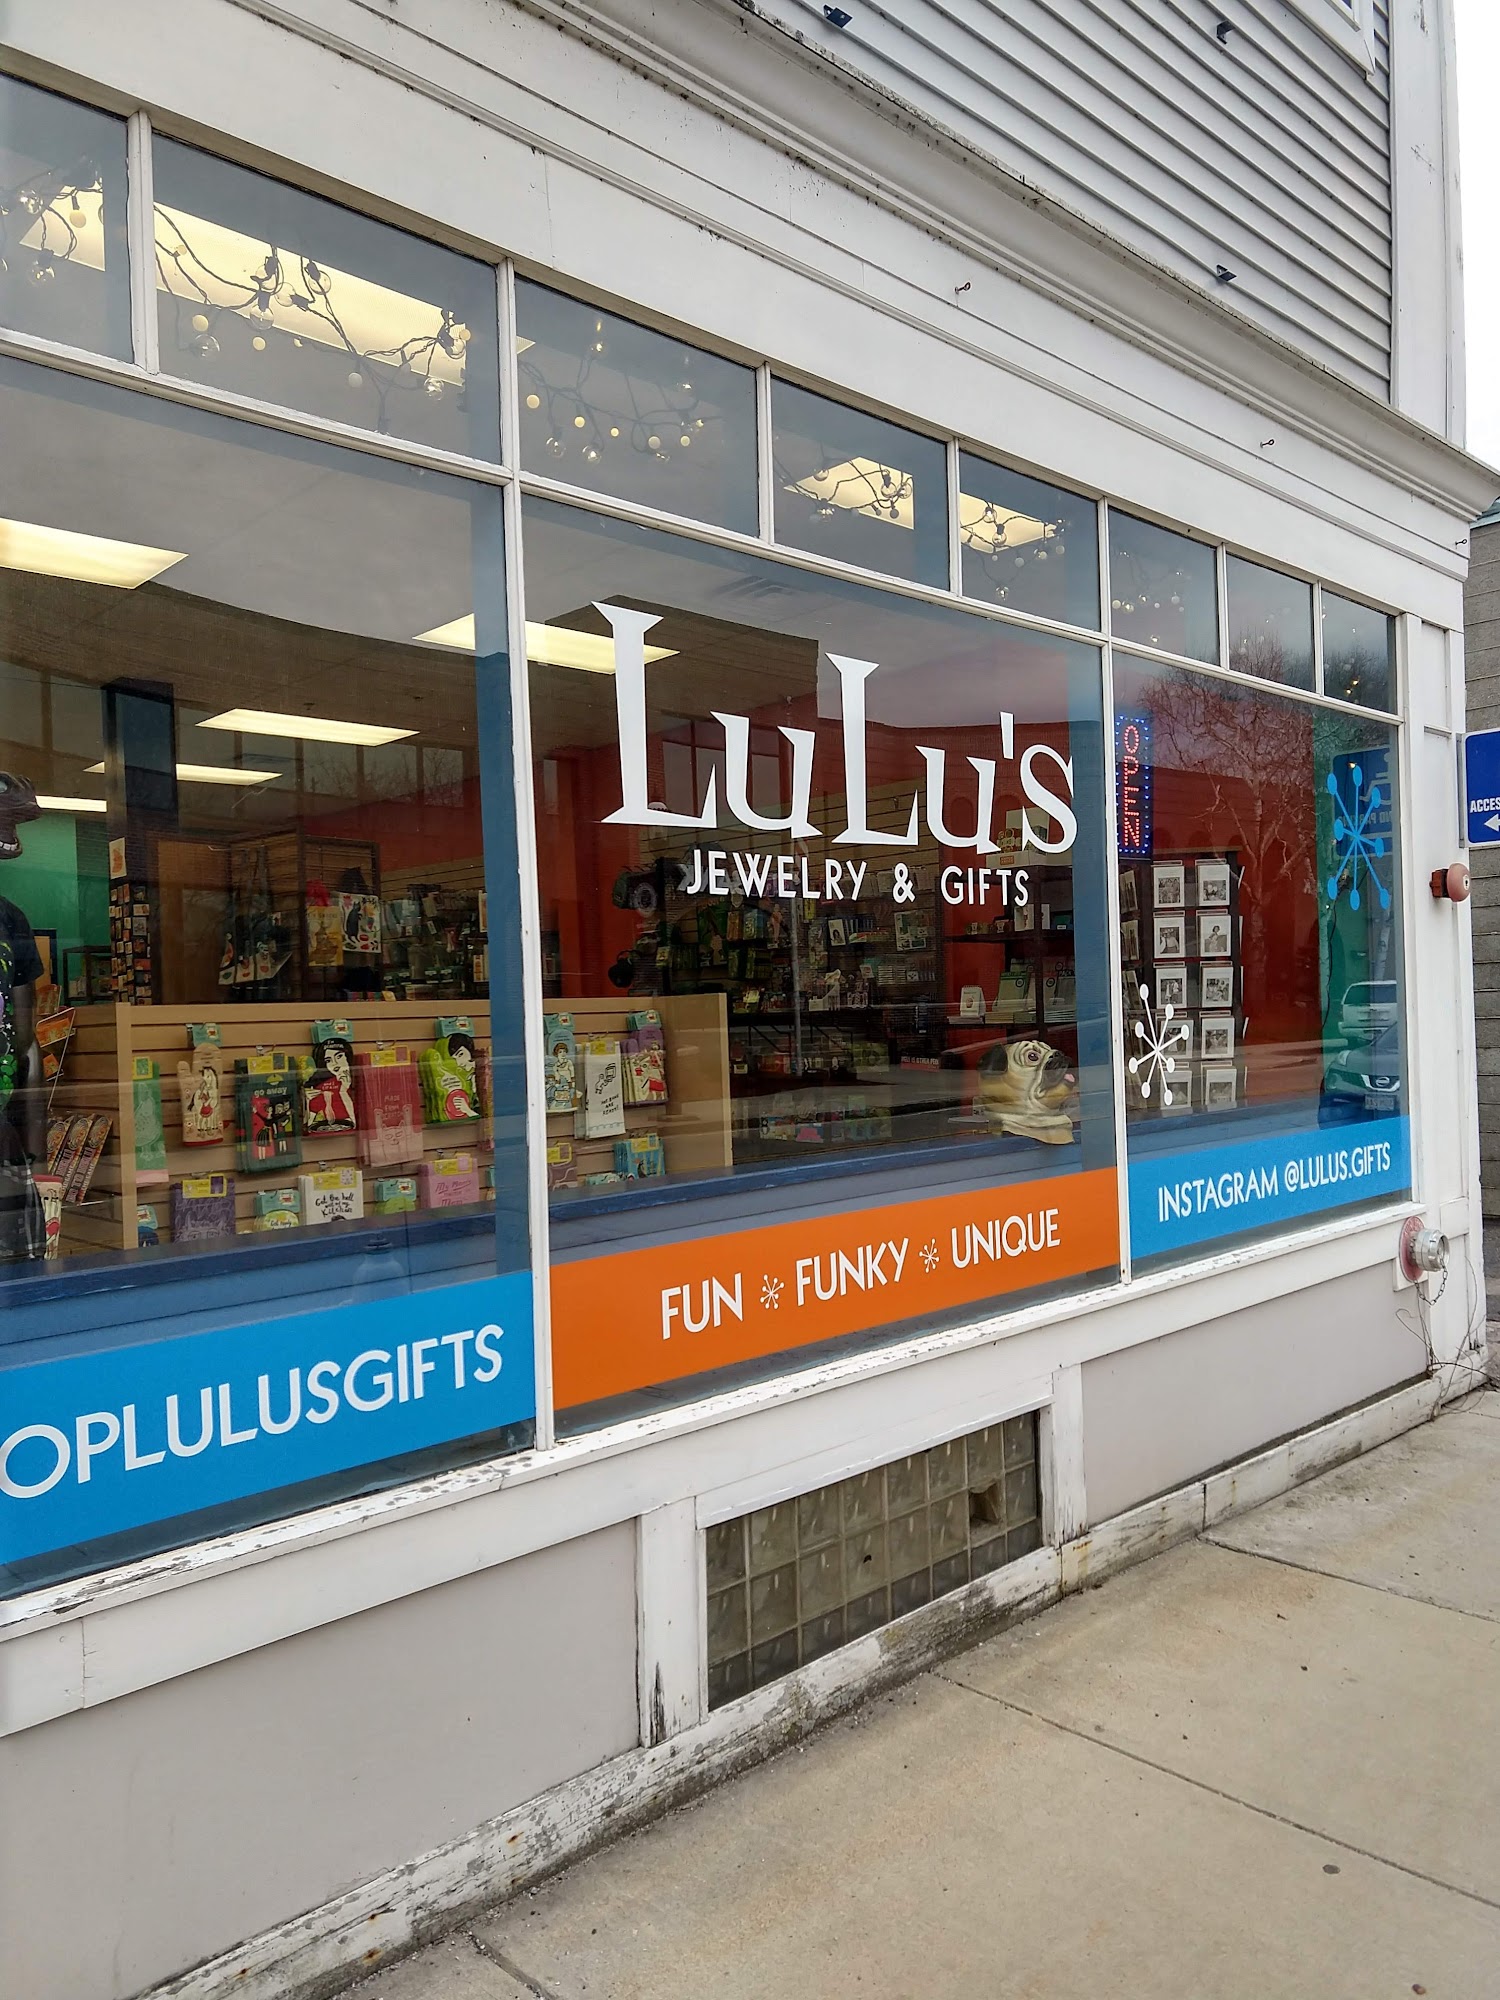 LuLu's Gems|Jewelry|Crystals|Gifts